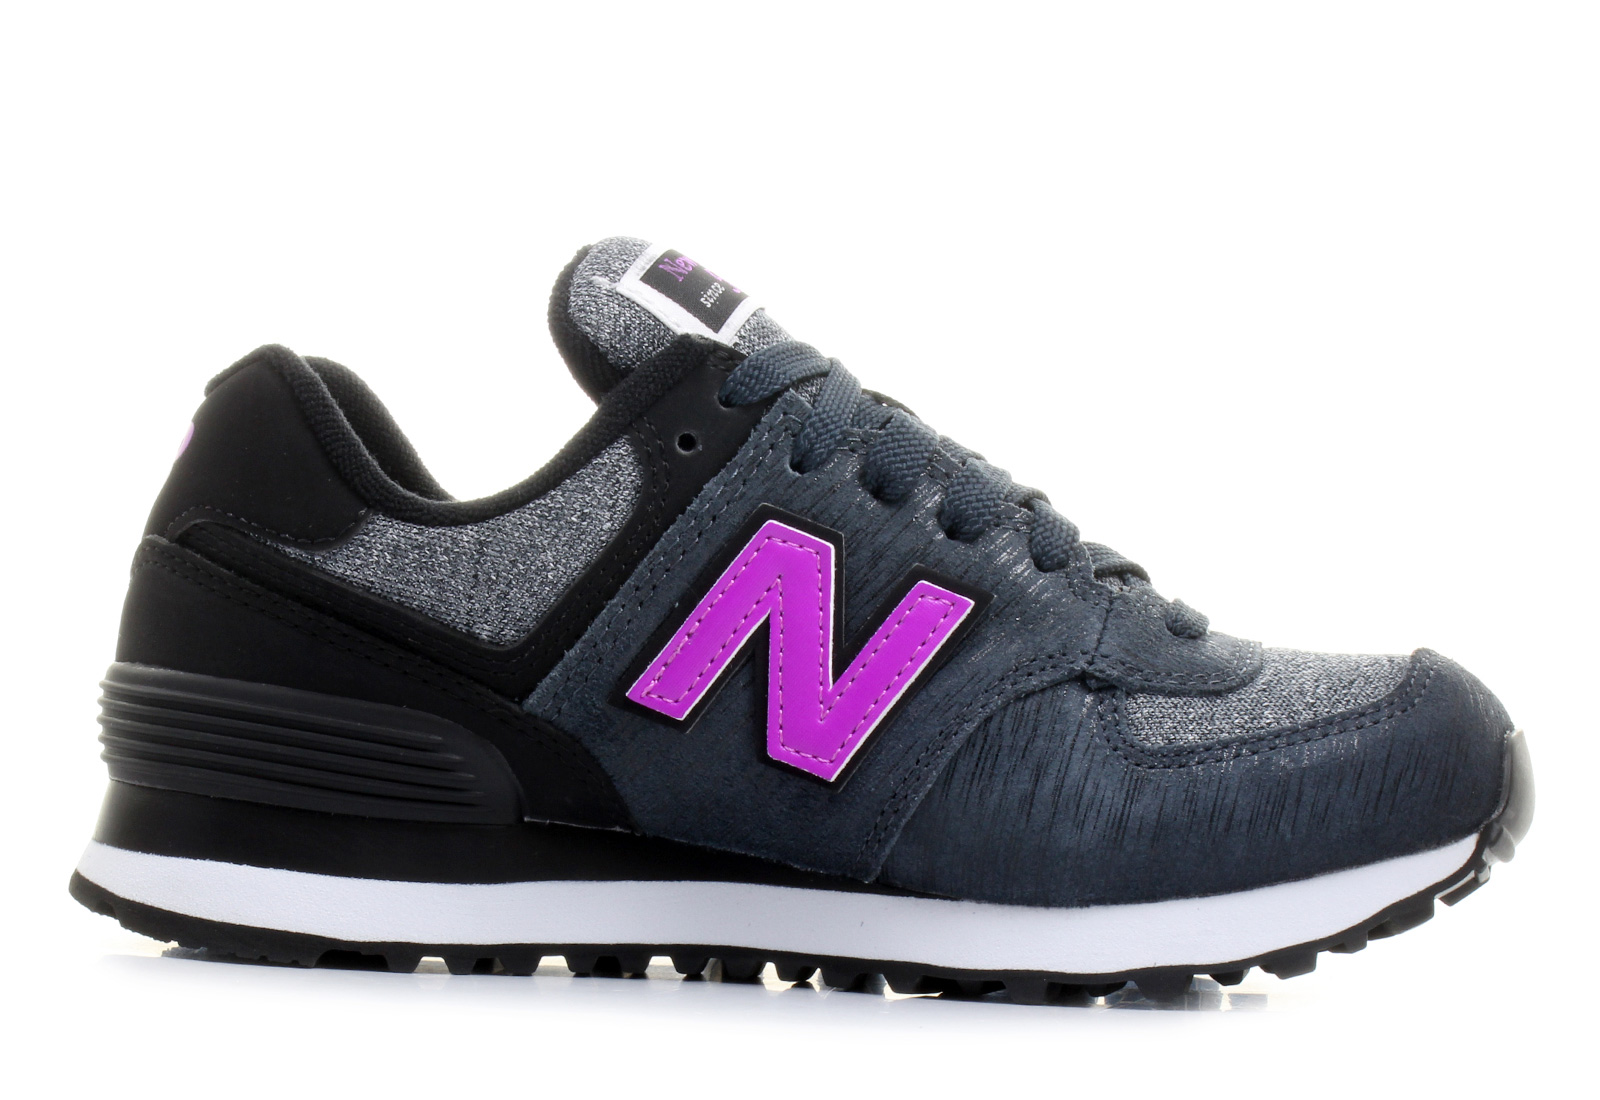 New Balance Shoes - Wl574 - WL574WTB - Online shop for sneakers, shoes and boots1600 x 1100